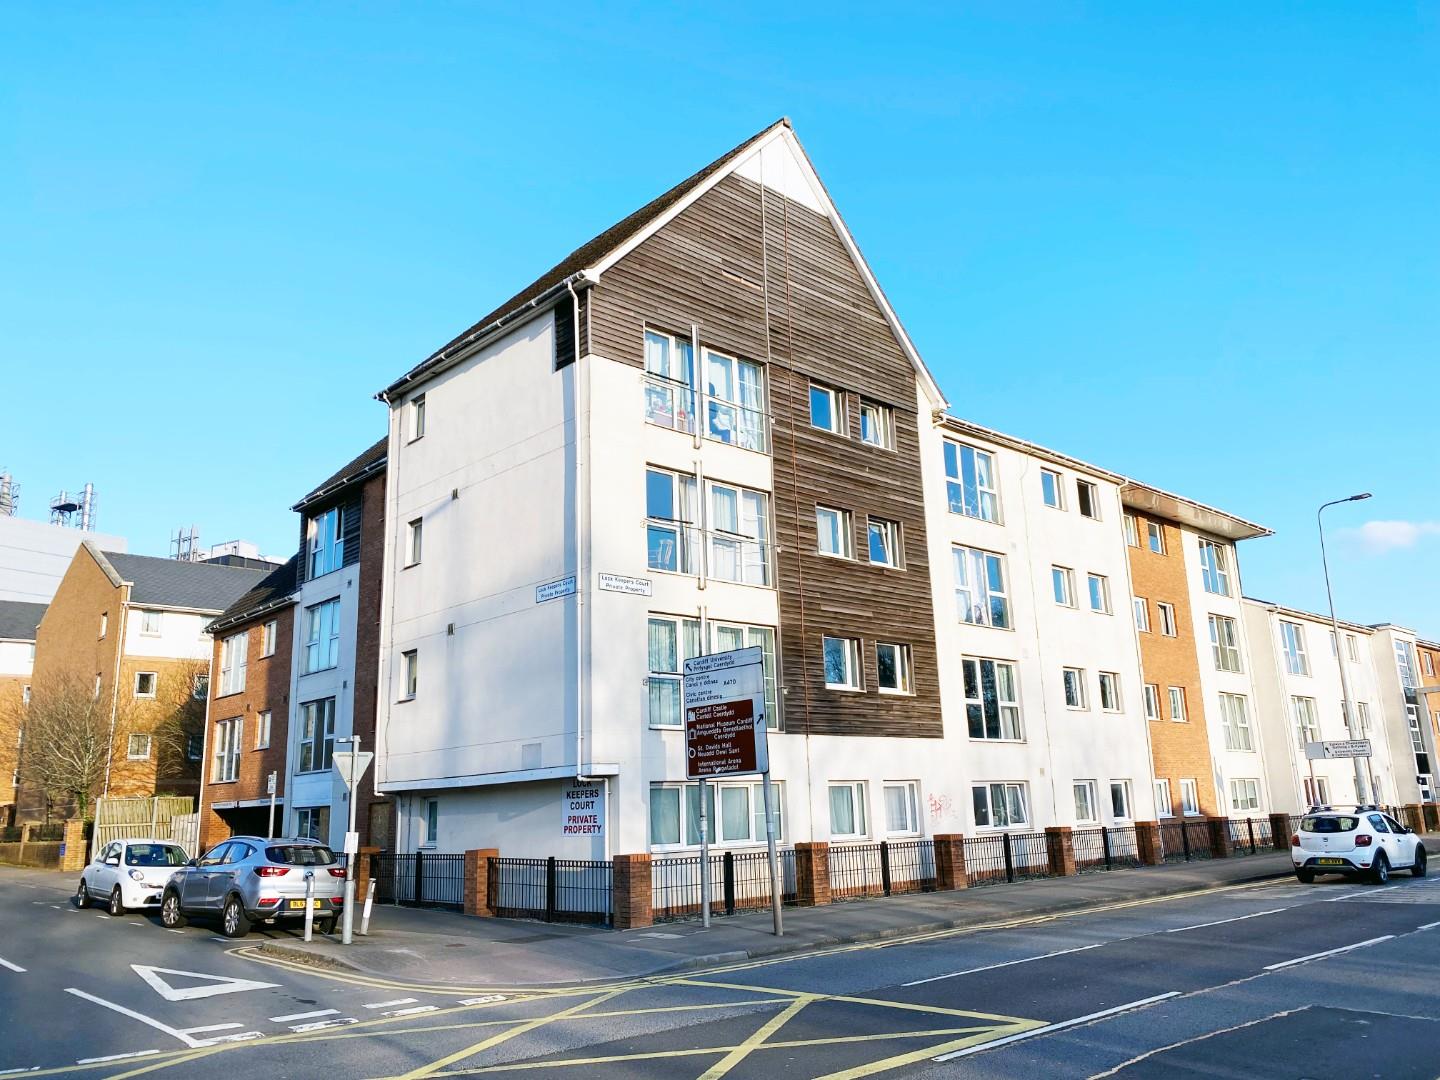 2 bed  for sale in Blackweir Terrace, Cardiff, CF10